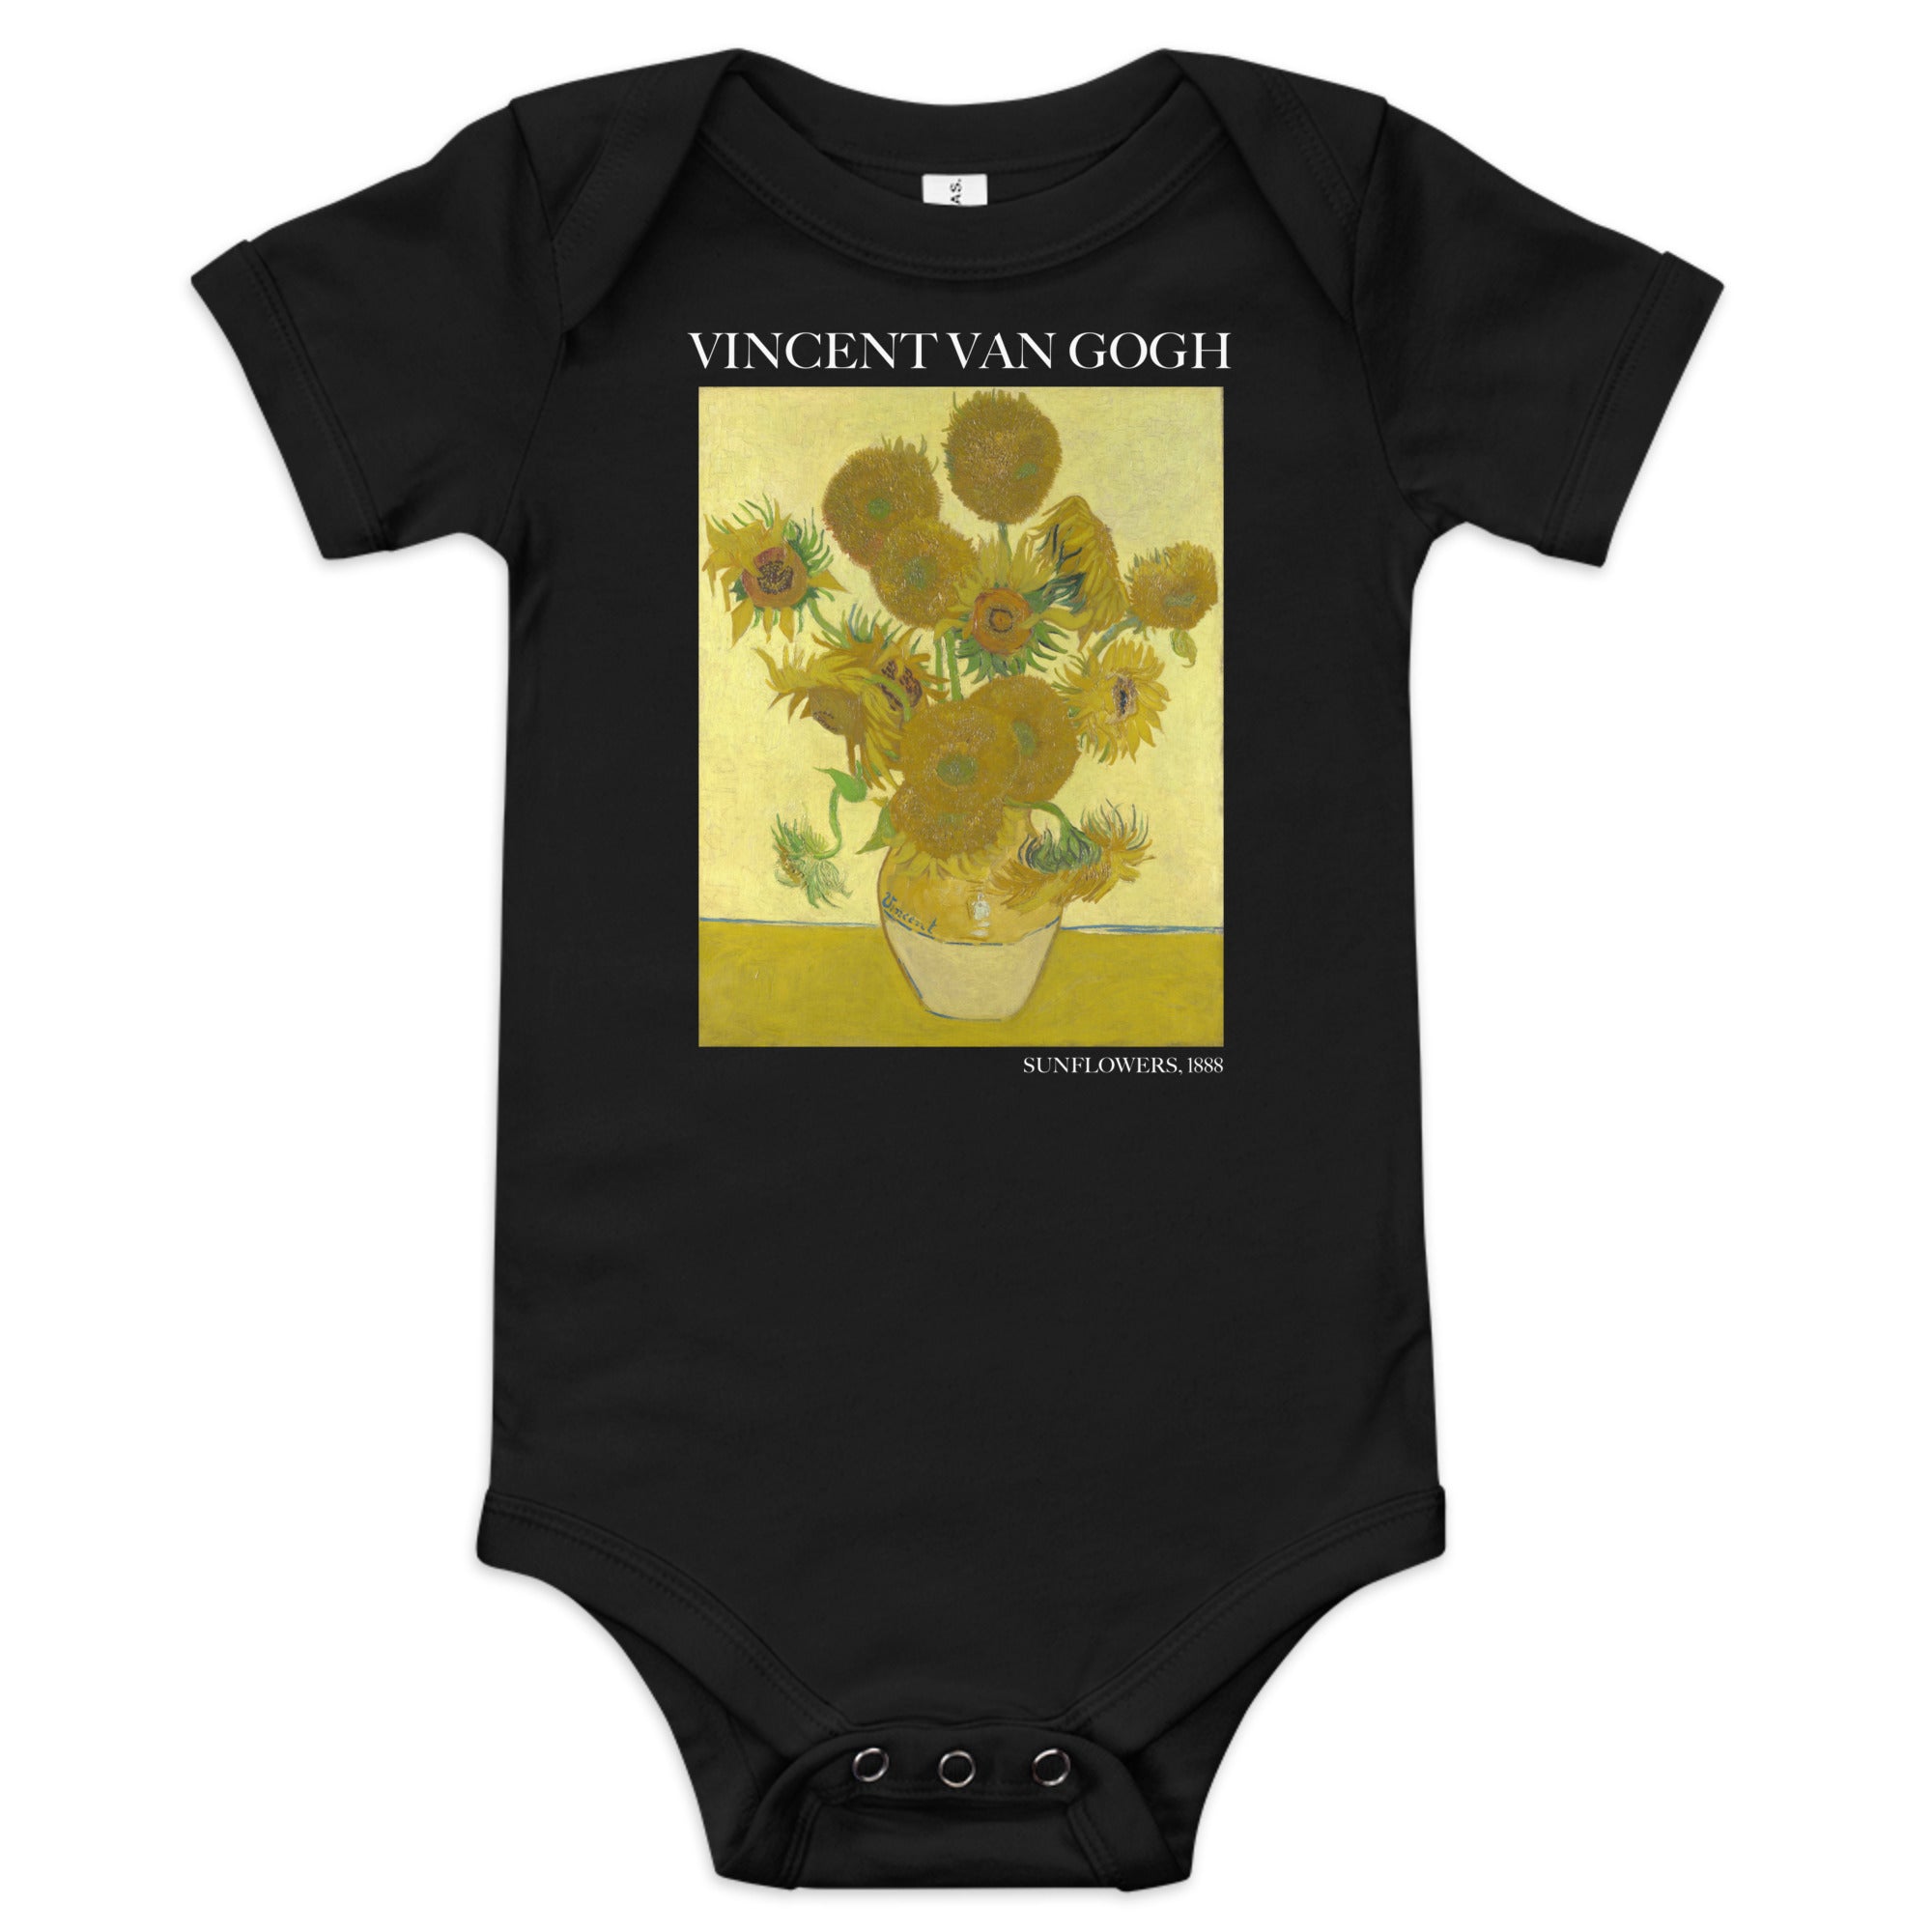 Vincent van Gogh 'Sunflowers' Famous Painting Short Sleeve One Piece | Premium Baby Art One Sleeve